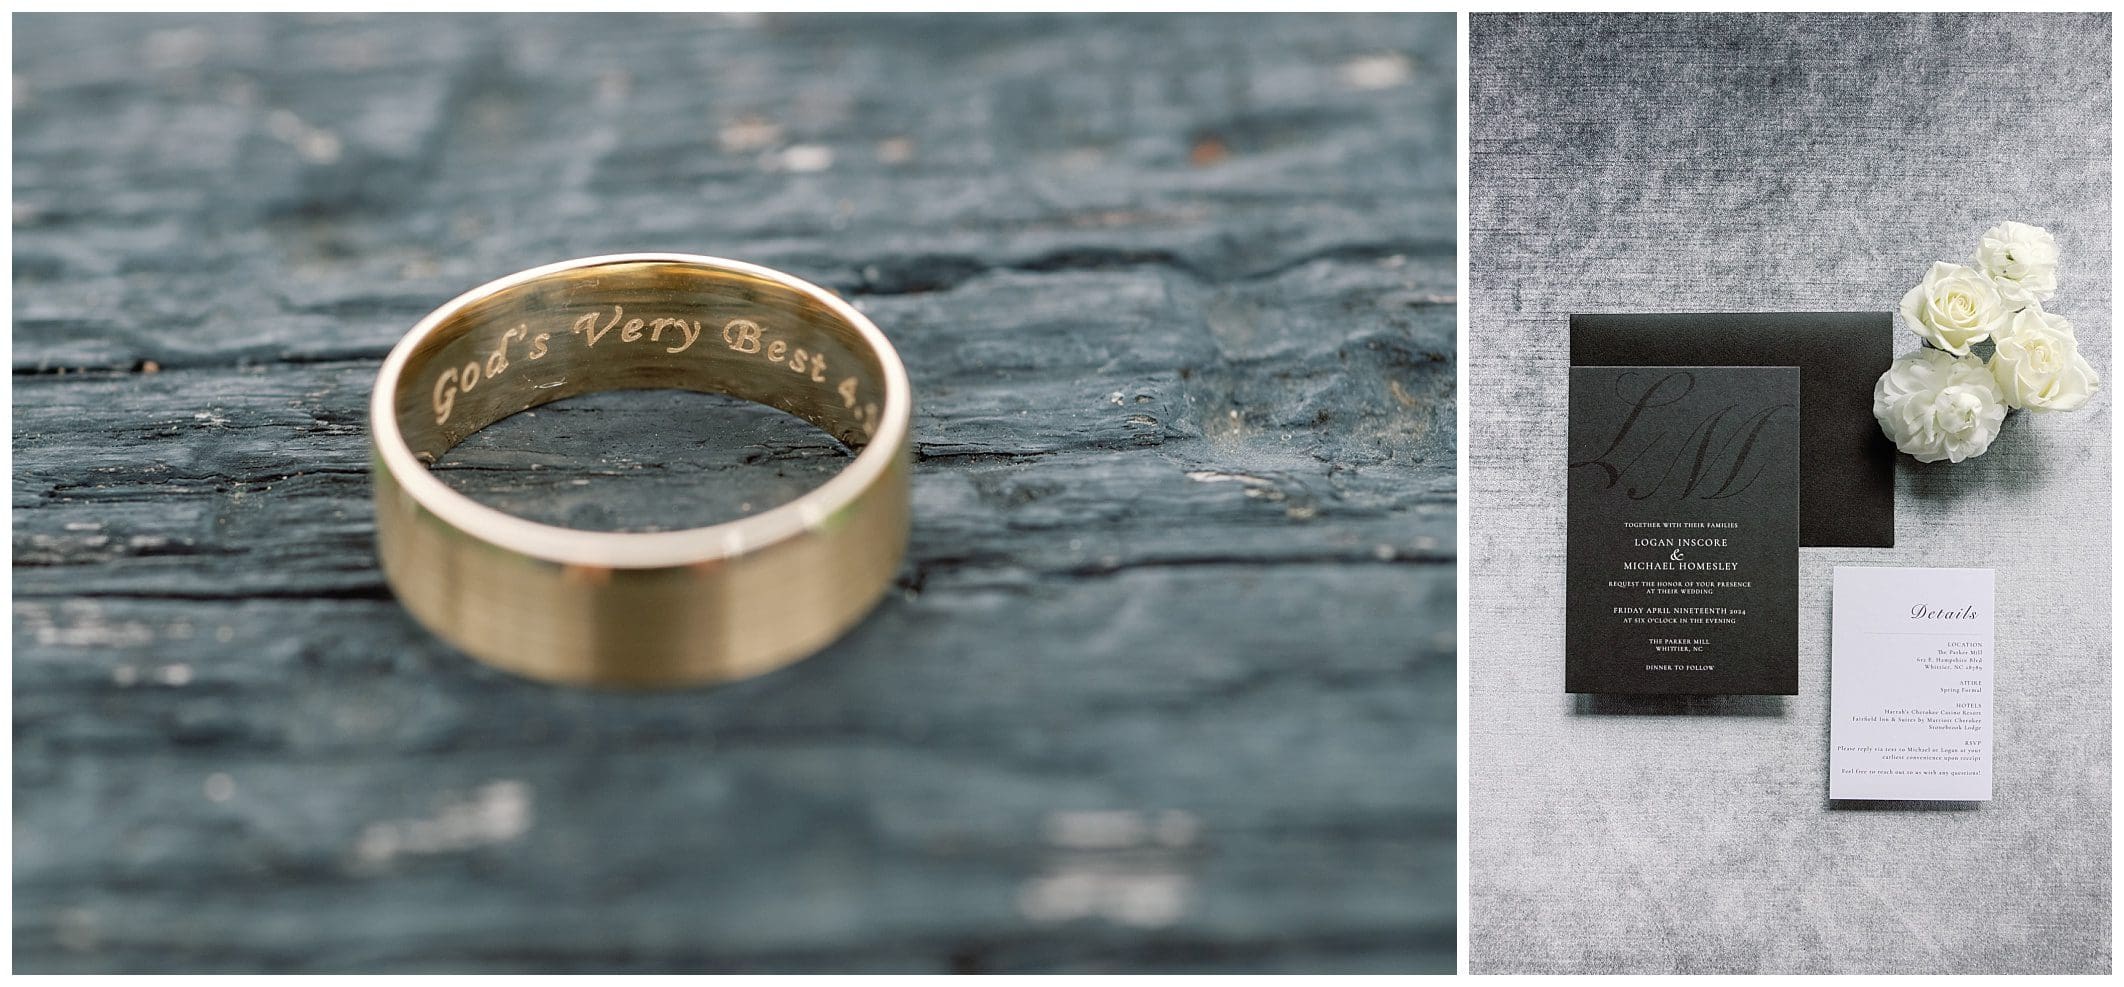 Gold wedding band with "god's very best" engraved inside, on a textured wooden surface. on the right, elegant wedding invitation suite with white flowers.